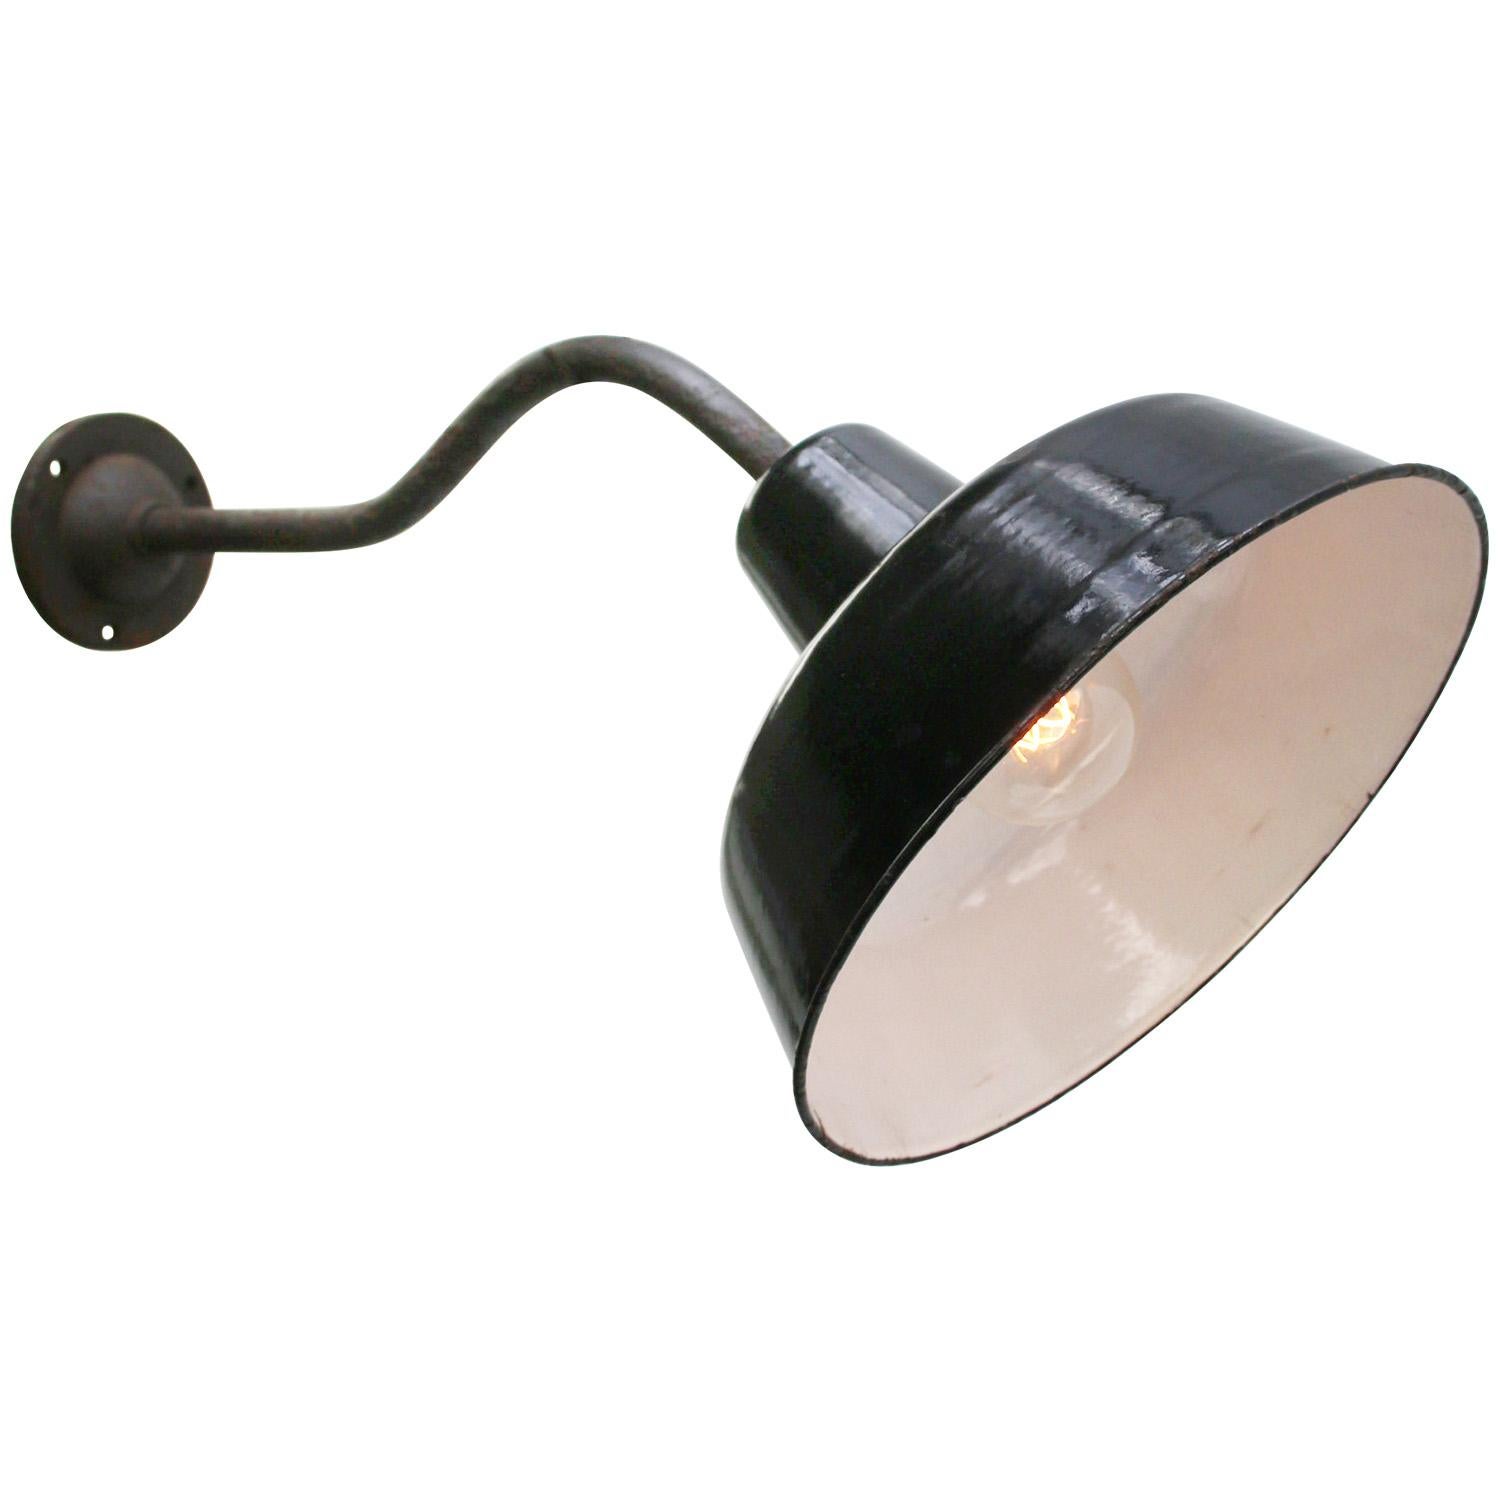 French factory wall light
black enamel, white interior

diameter cast iron wall piece: 9 cm, 2 holes to secure

Weight: 1.30 kg / 2.9 lb

Priced per individual item. All lamps have been made suitable by international standards for